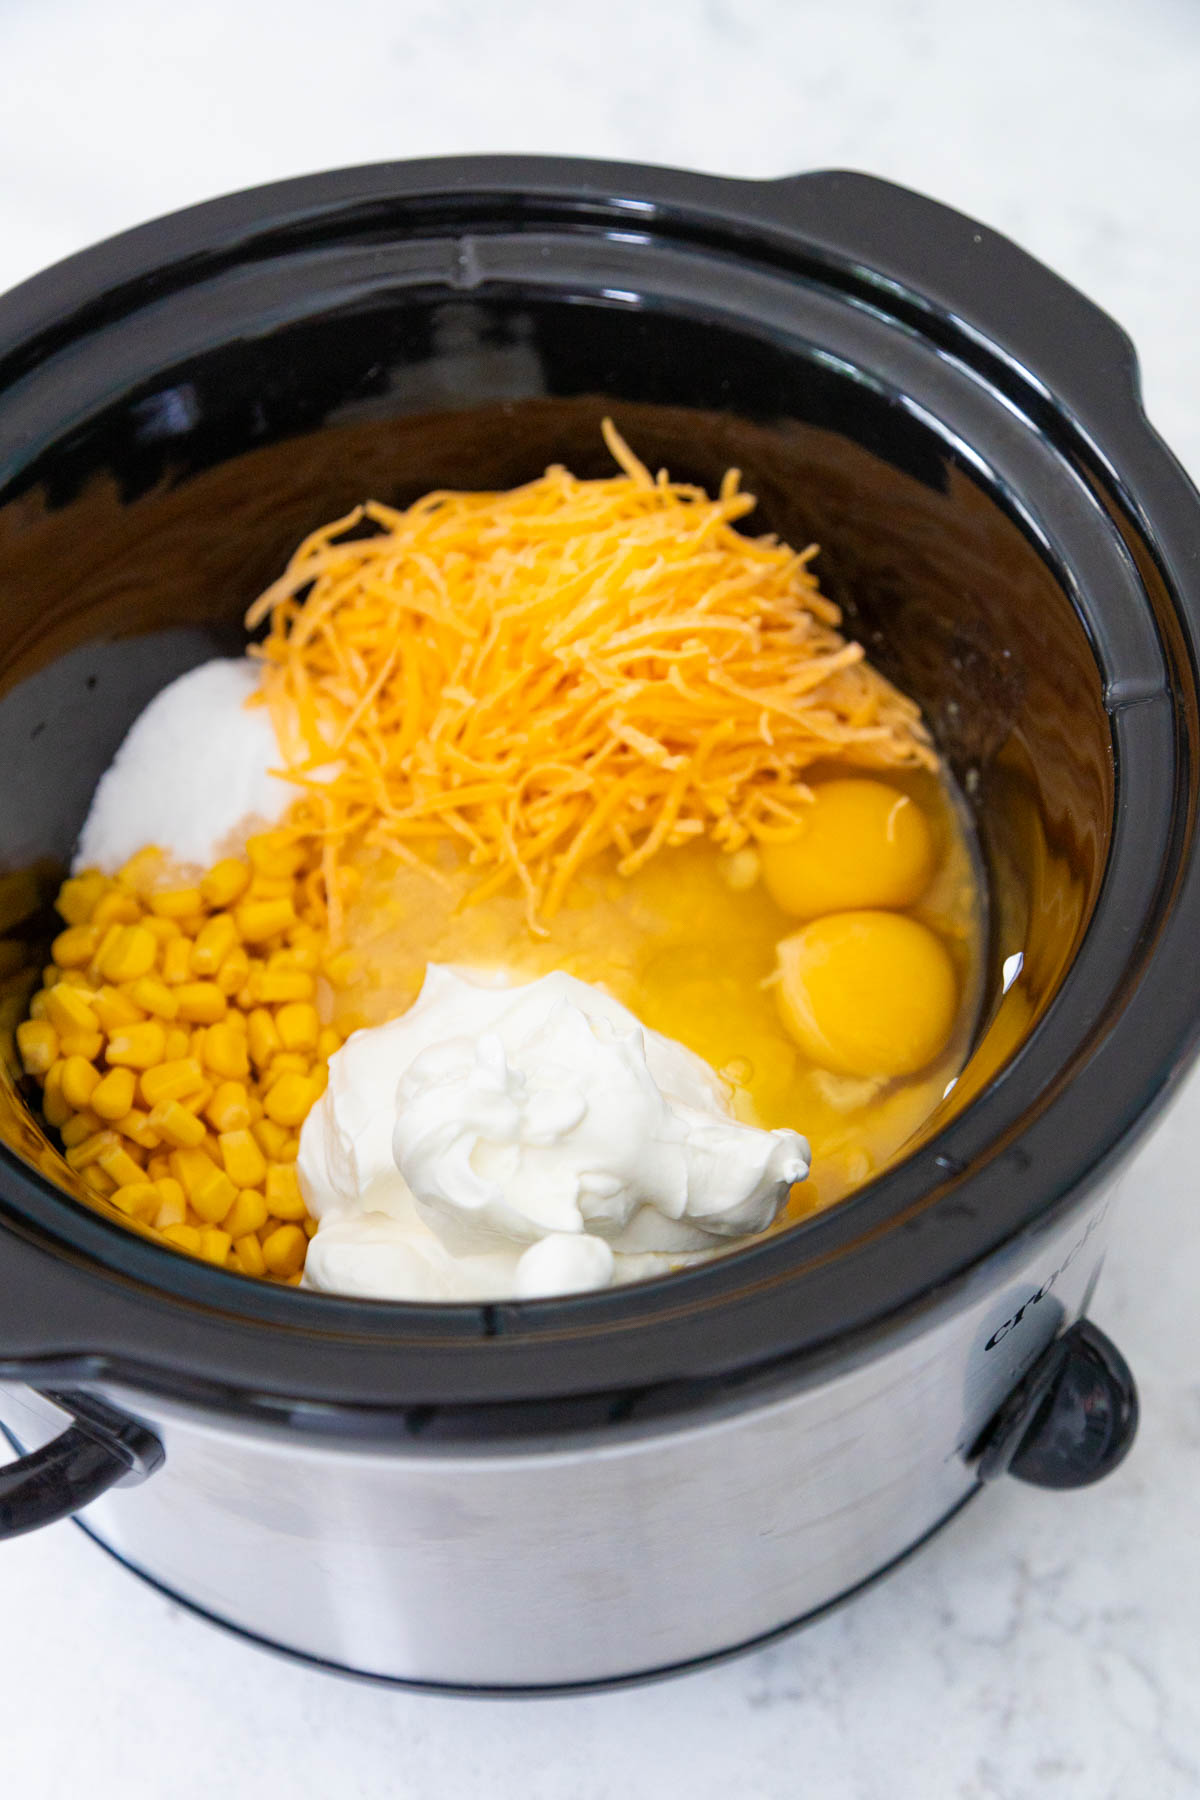 The corn, sour cream, eggs, shredded cheese, and sugar are in the bowl of the Crock Pot.